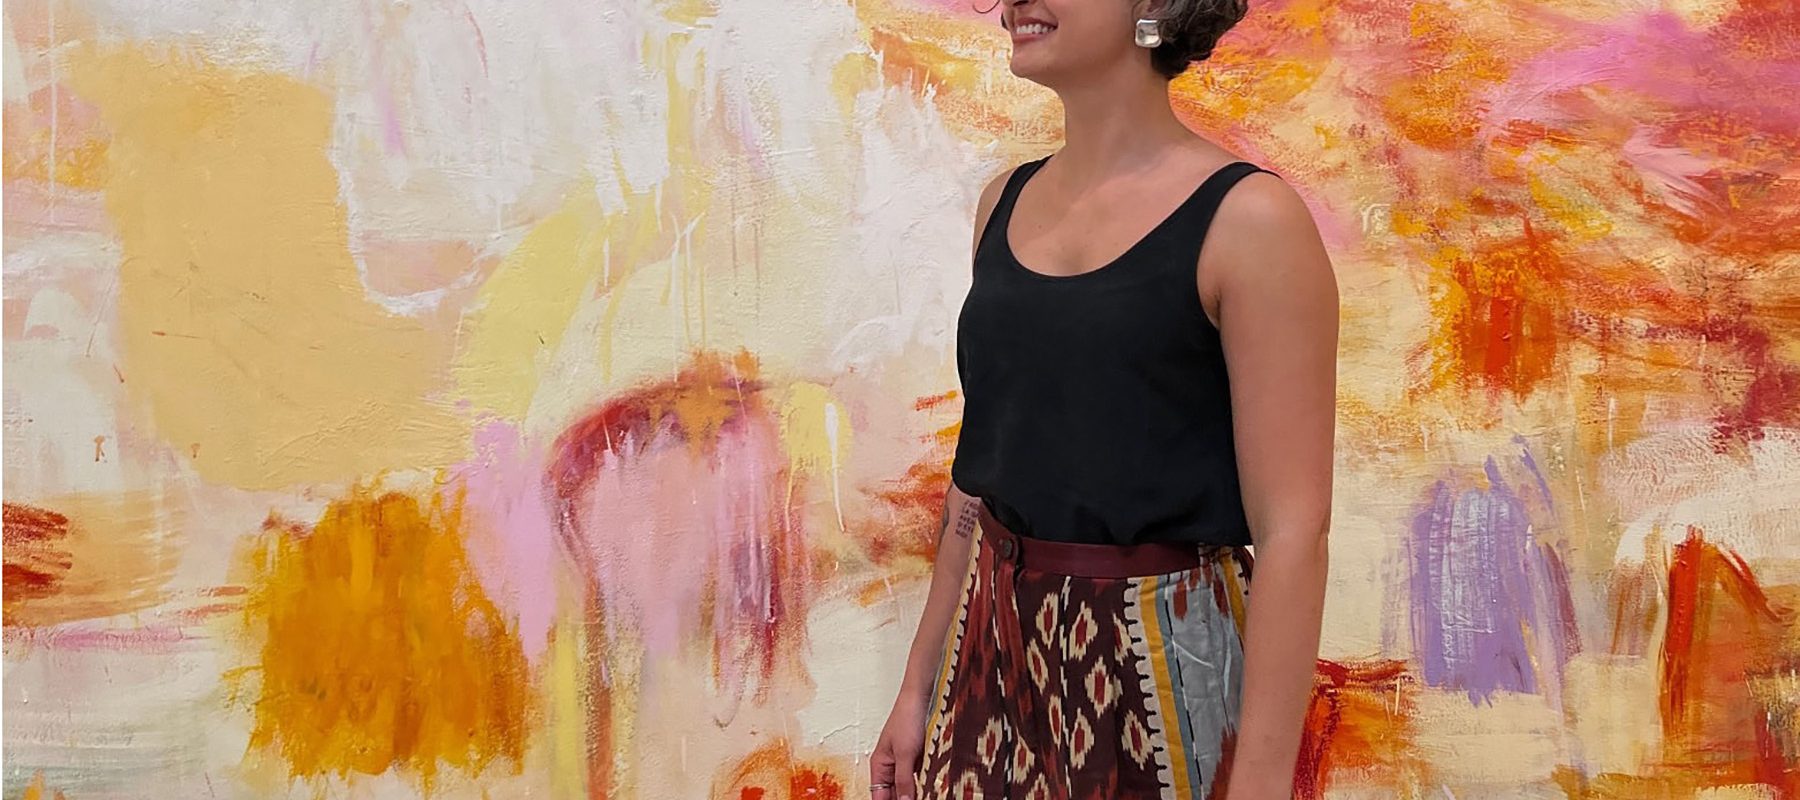 A young woman stands in front of a wall covered in a variety of colored paint.